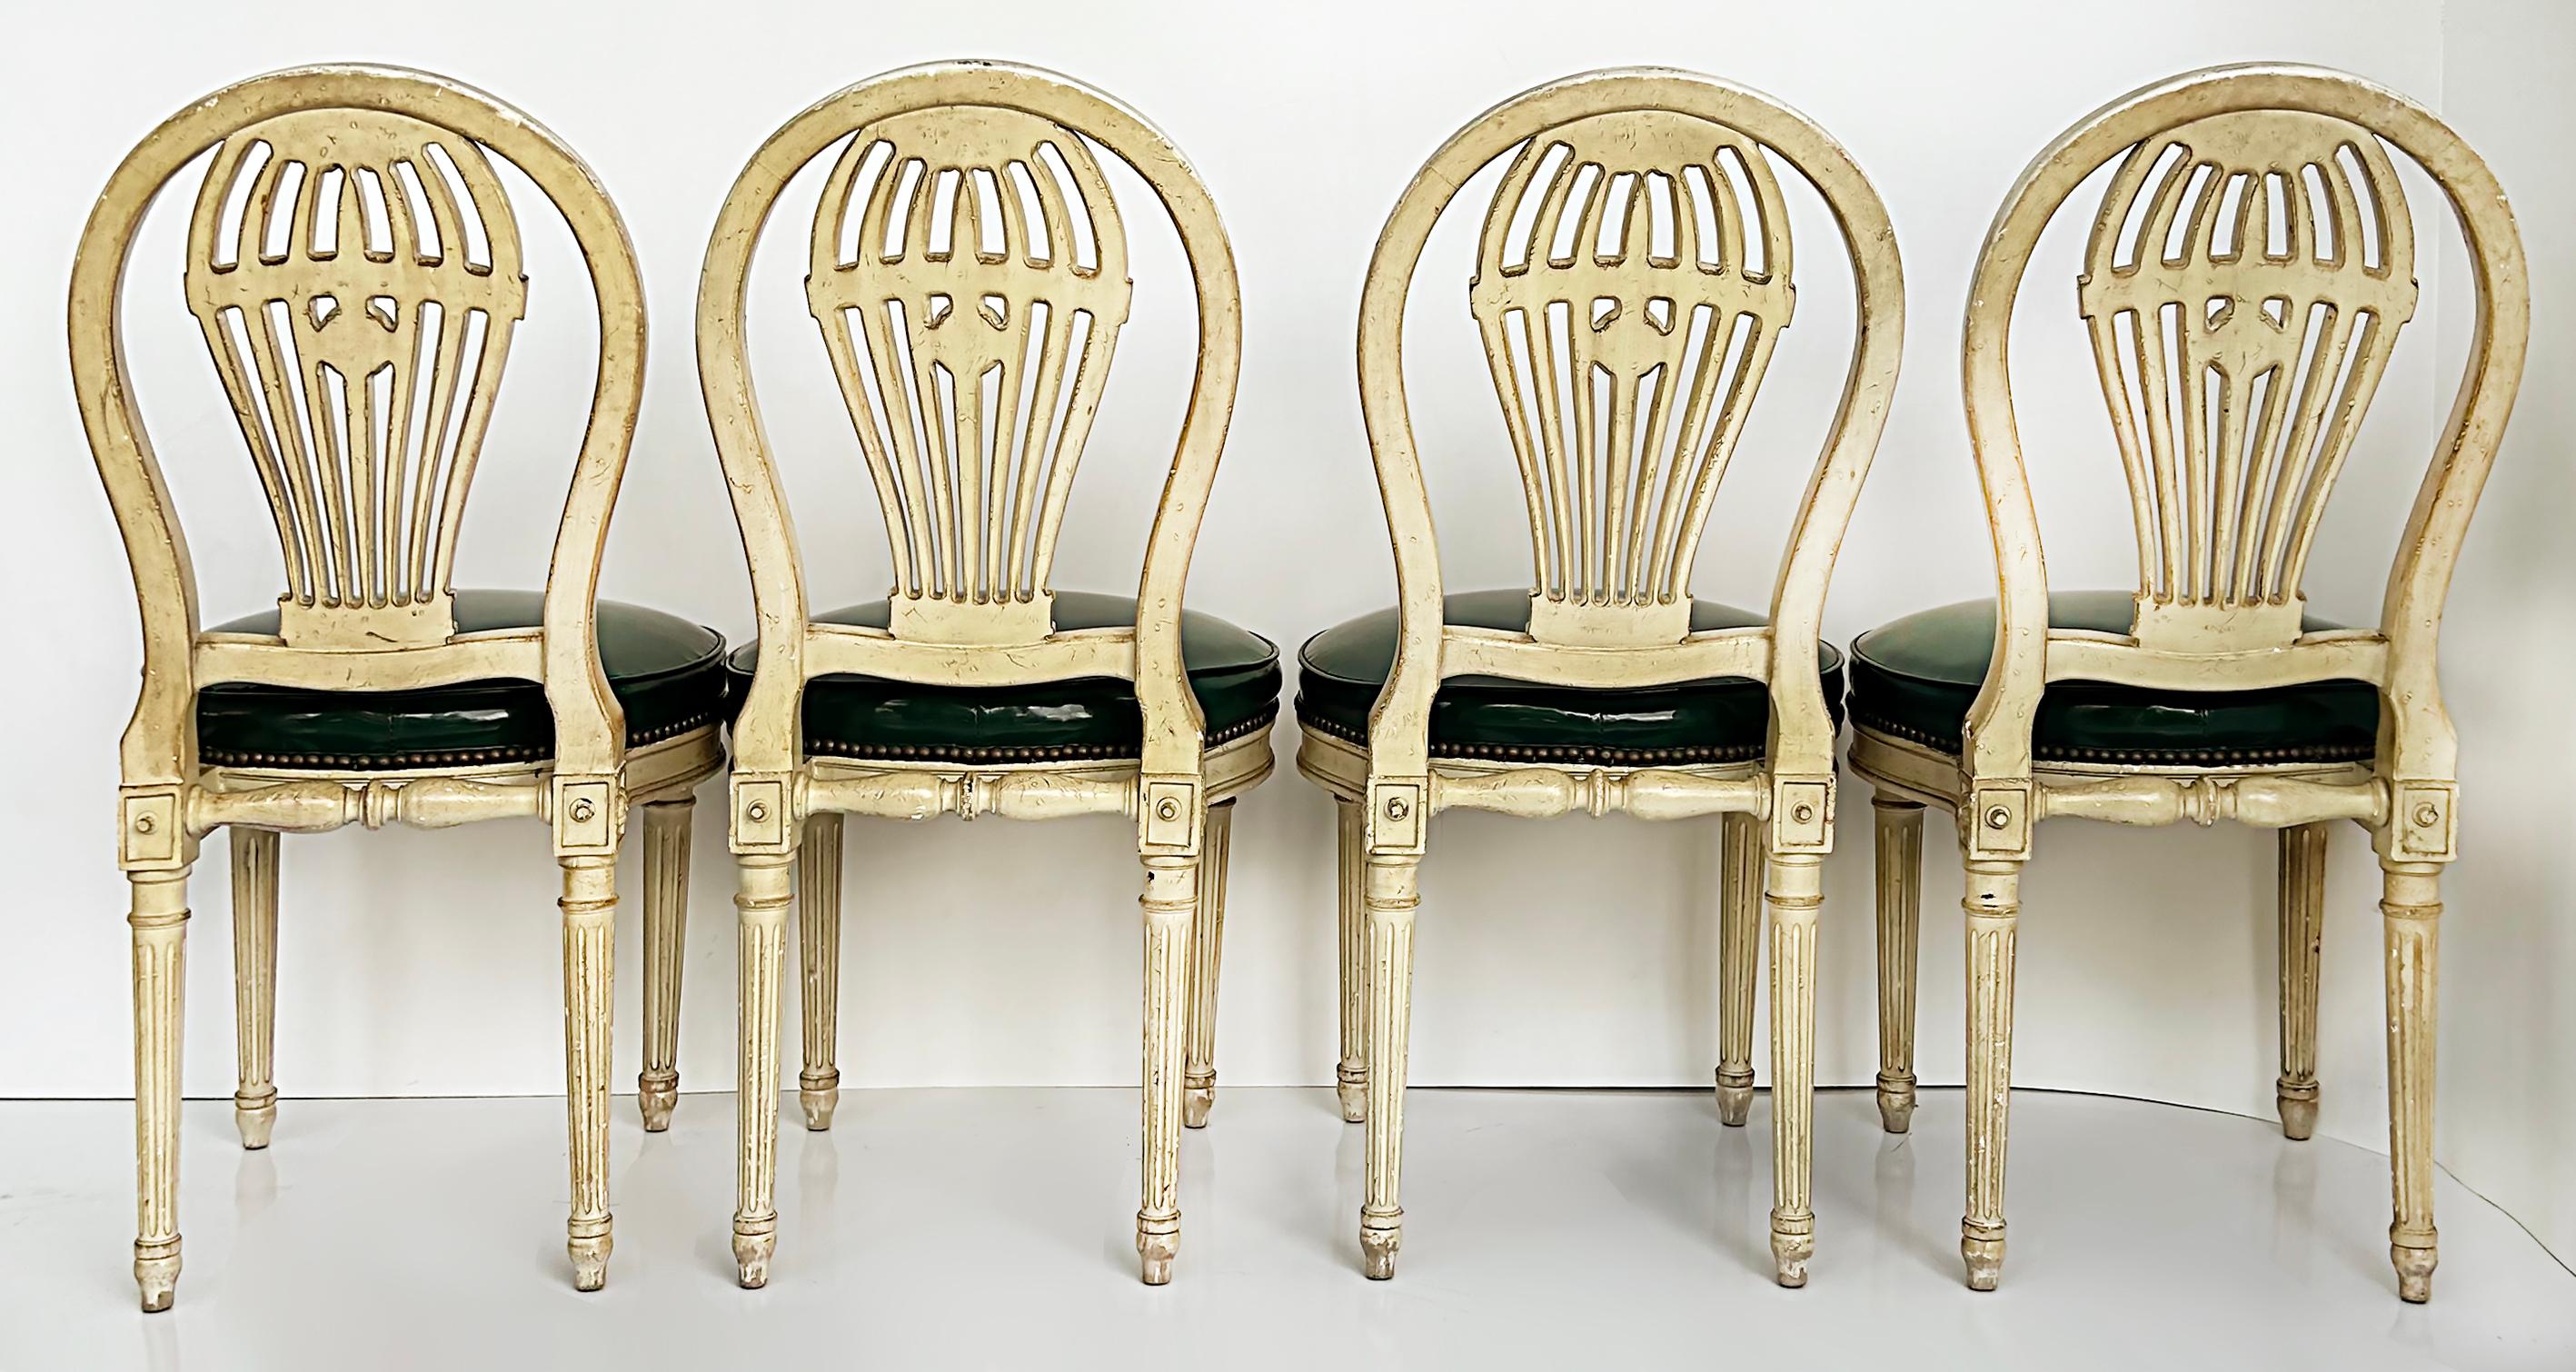 French Vintage Painted Balloon Back Chairs, Maison Jansen Attributed, Patent Faux Seats